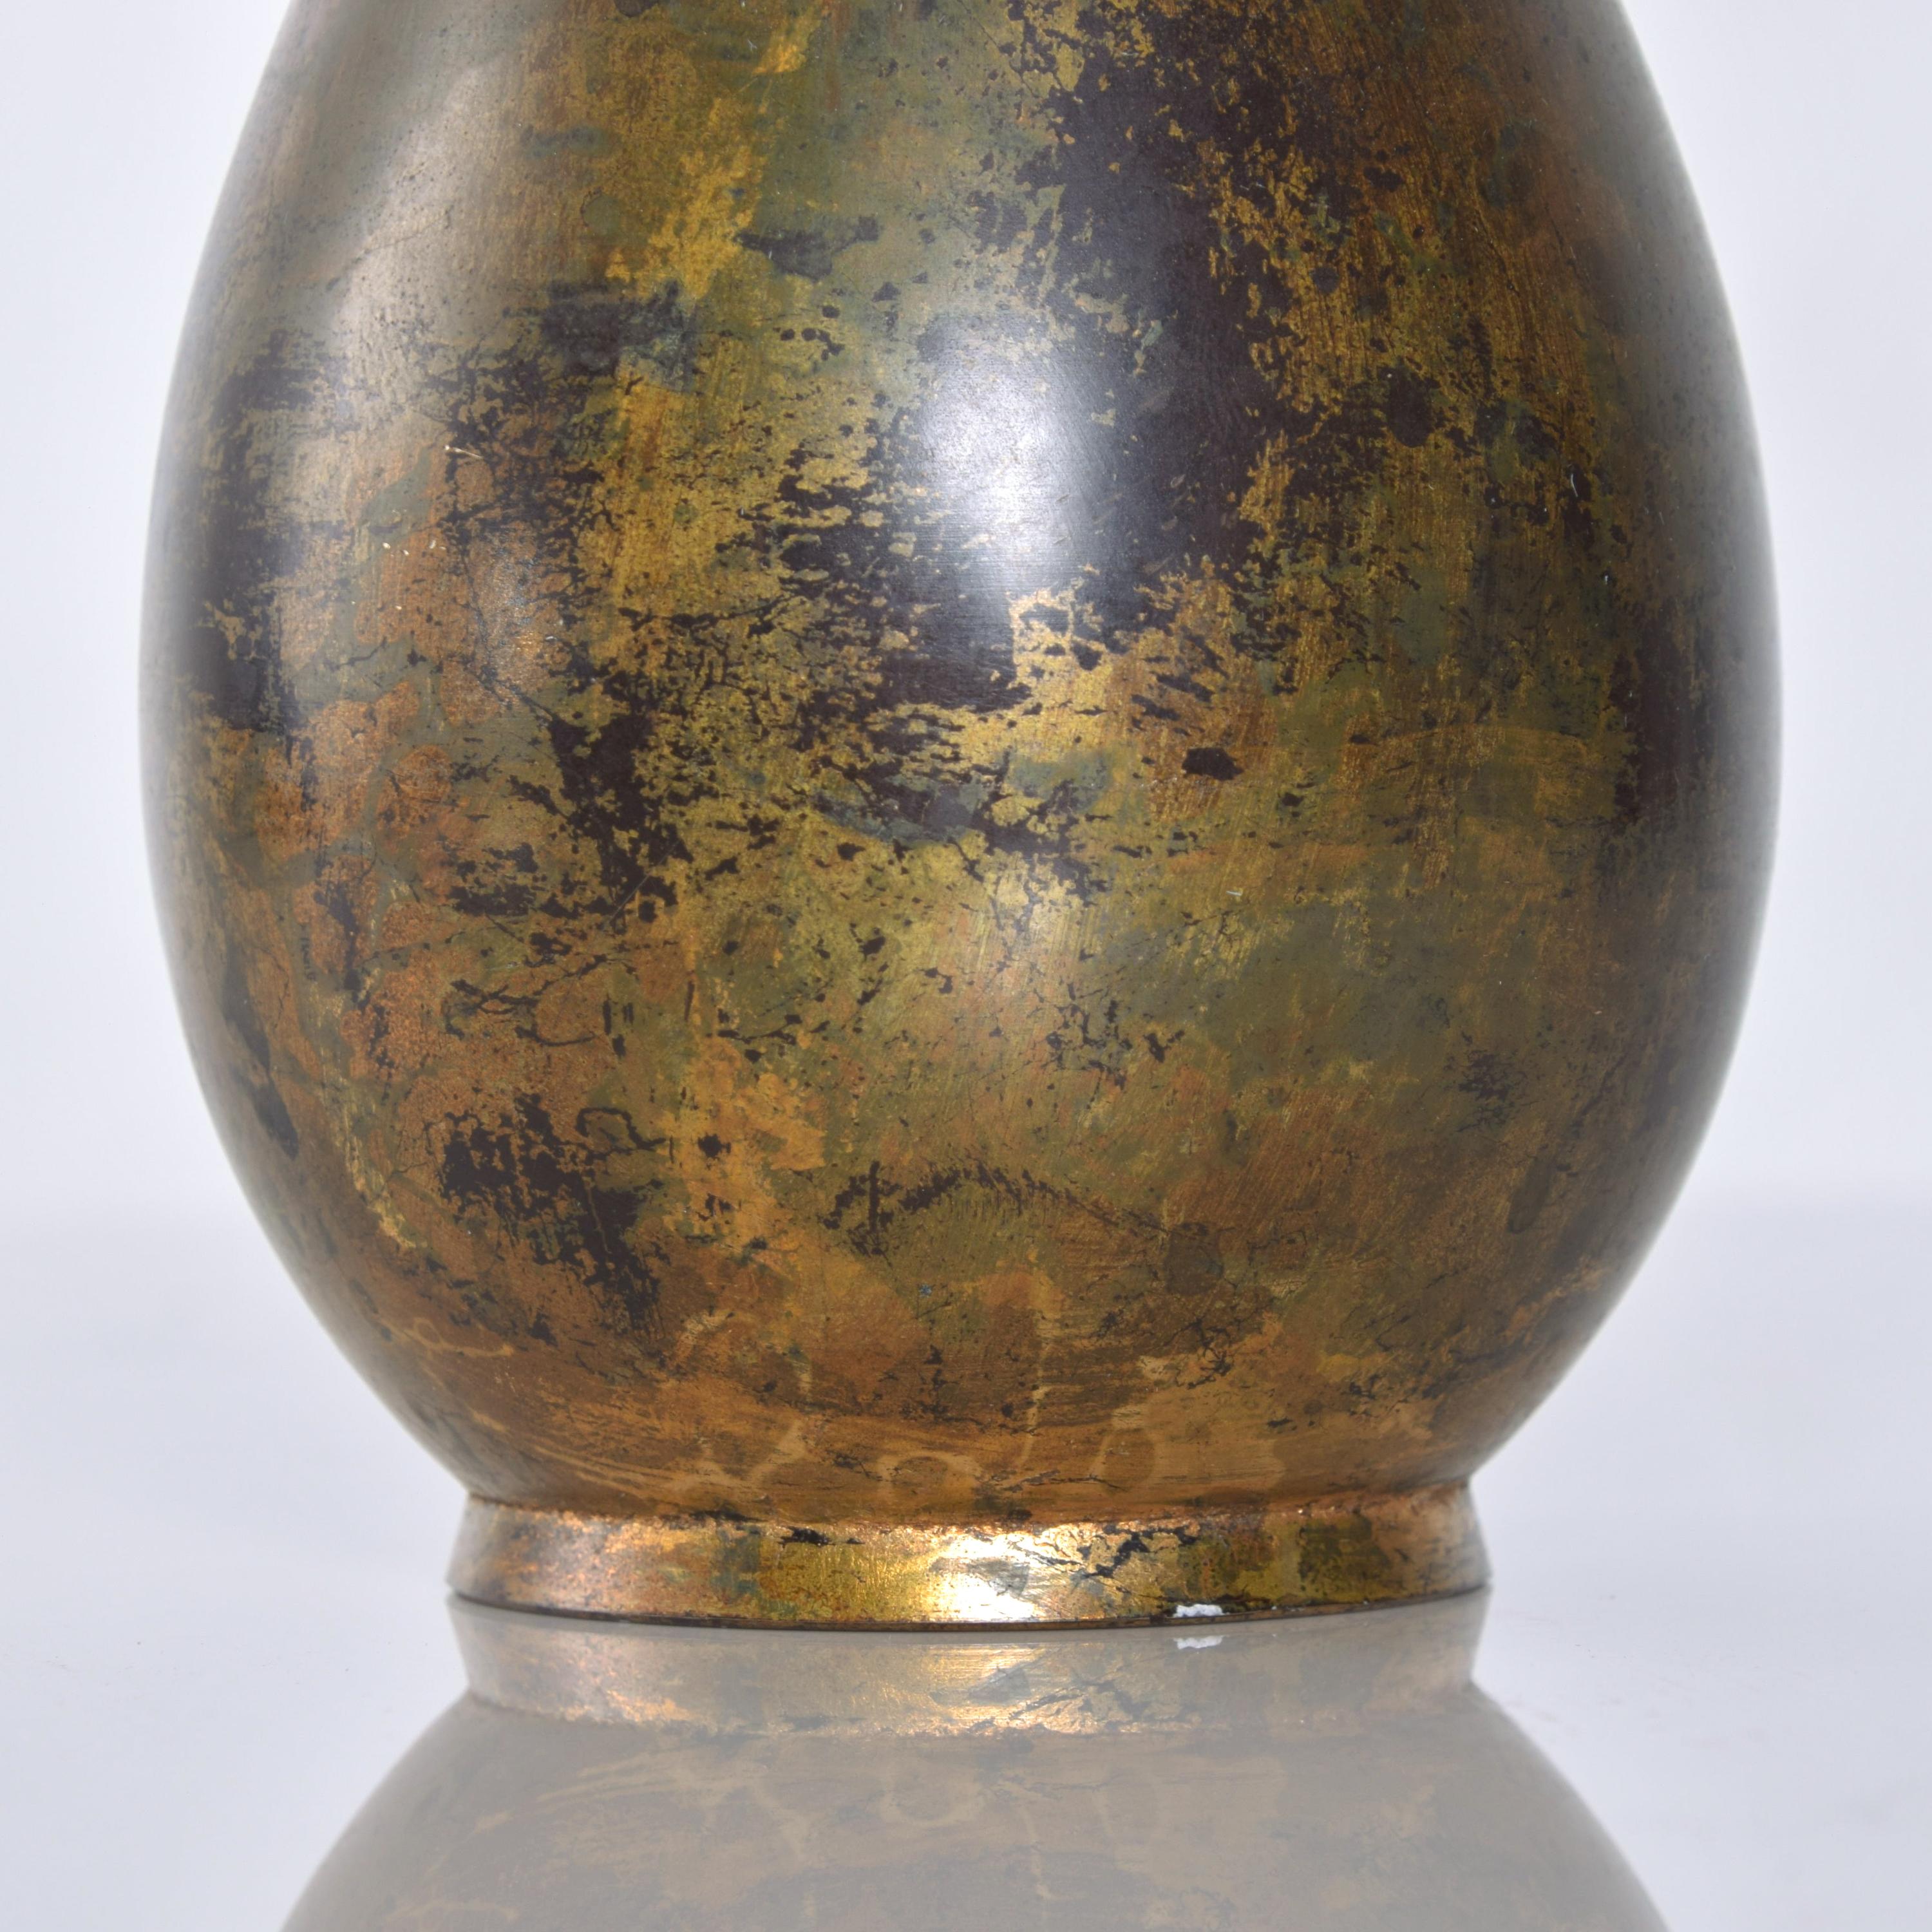 Sculptural Japanese mixed metal iron and gilt patinated ovoid vase flared narrow neck
Made in Japan, circa 1960
Measures: 9 height x 3.5 inches in diameter
Original vintage preowned condition. See images.